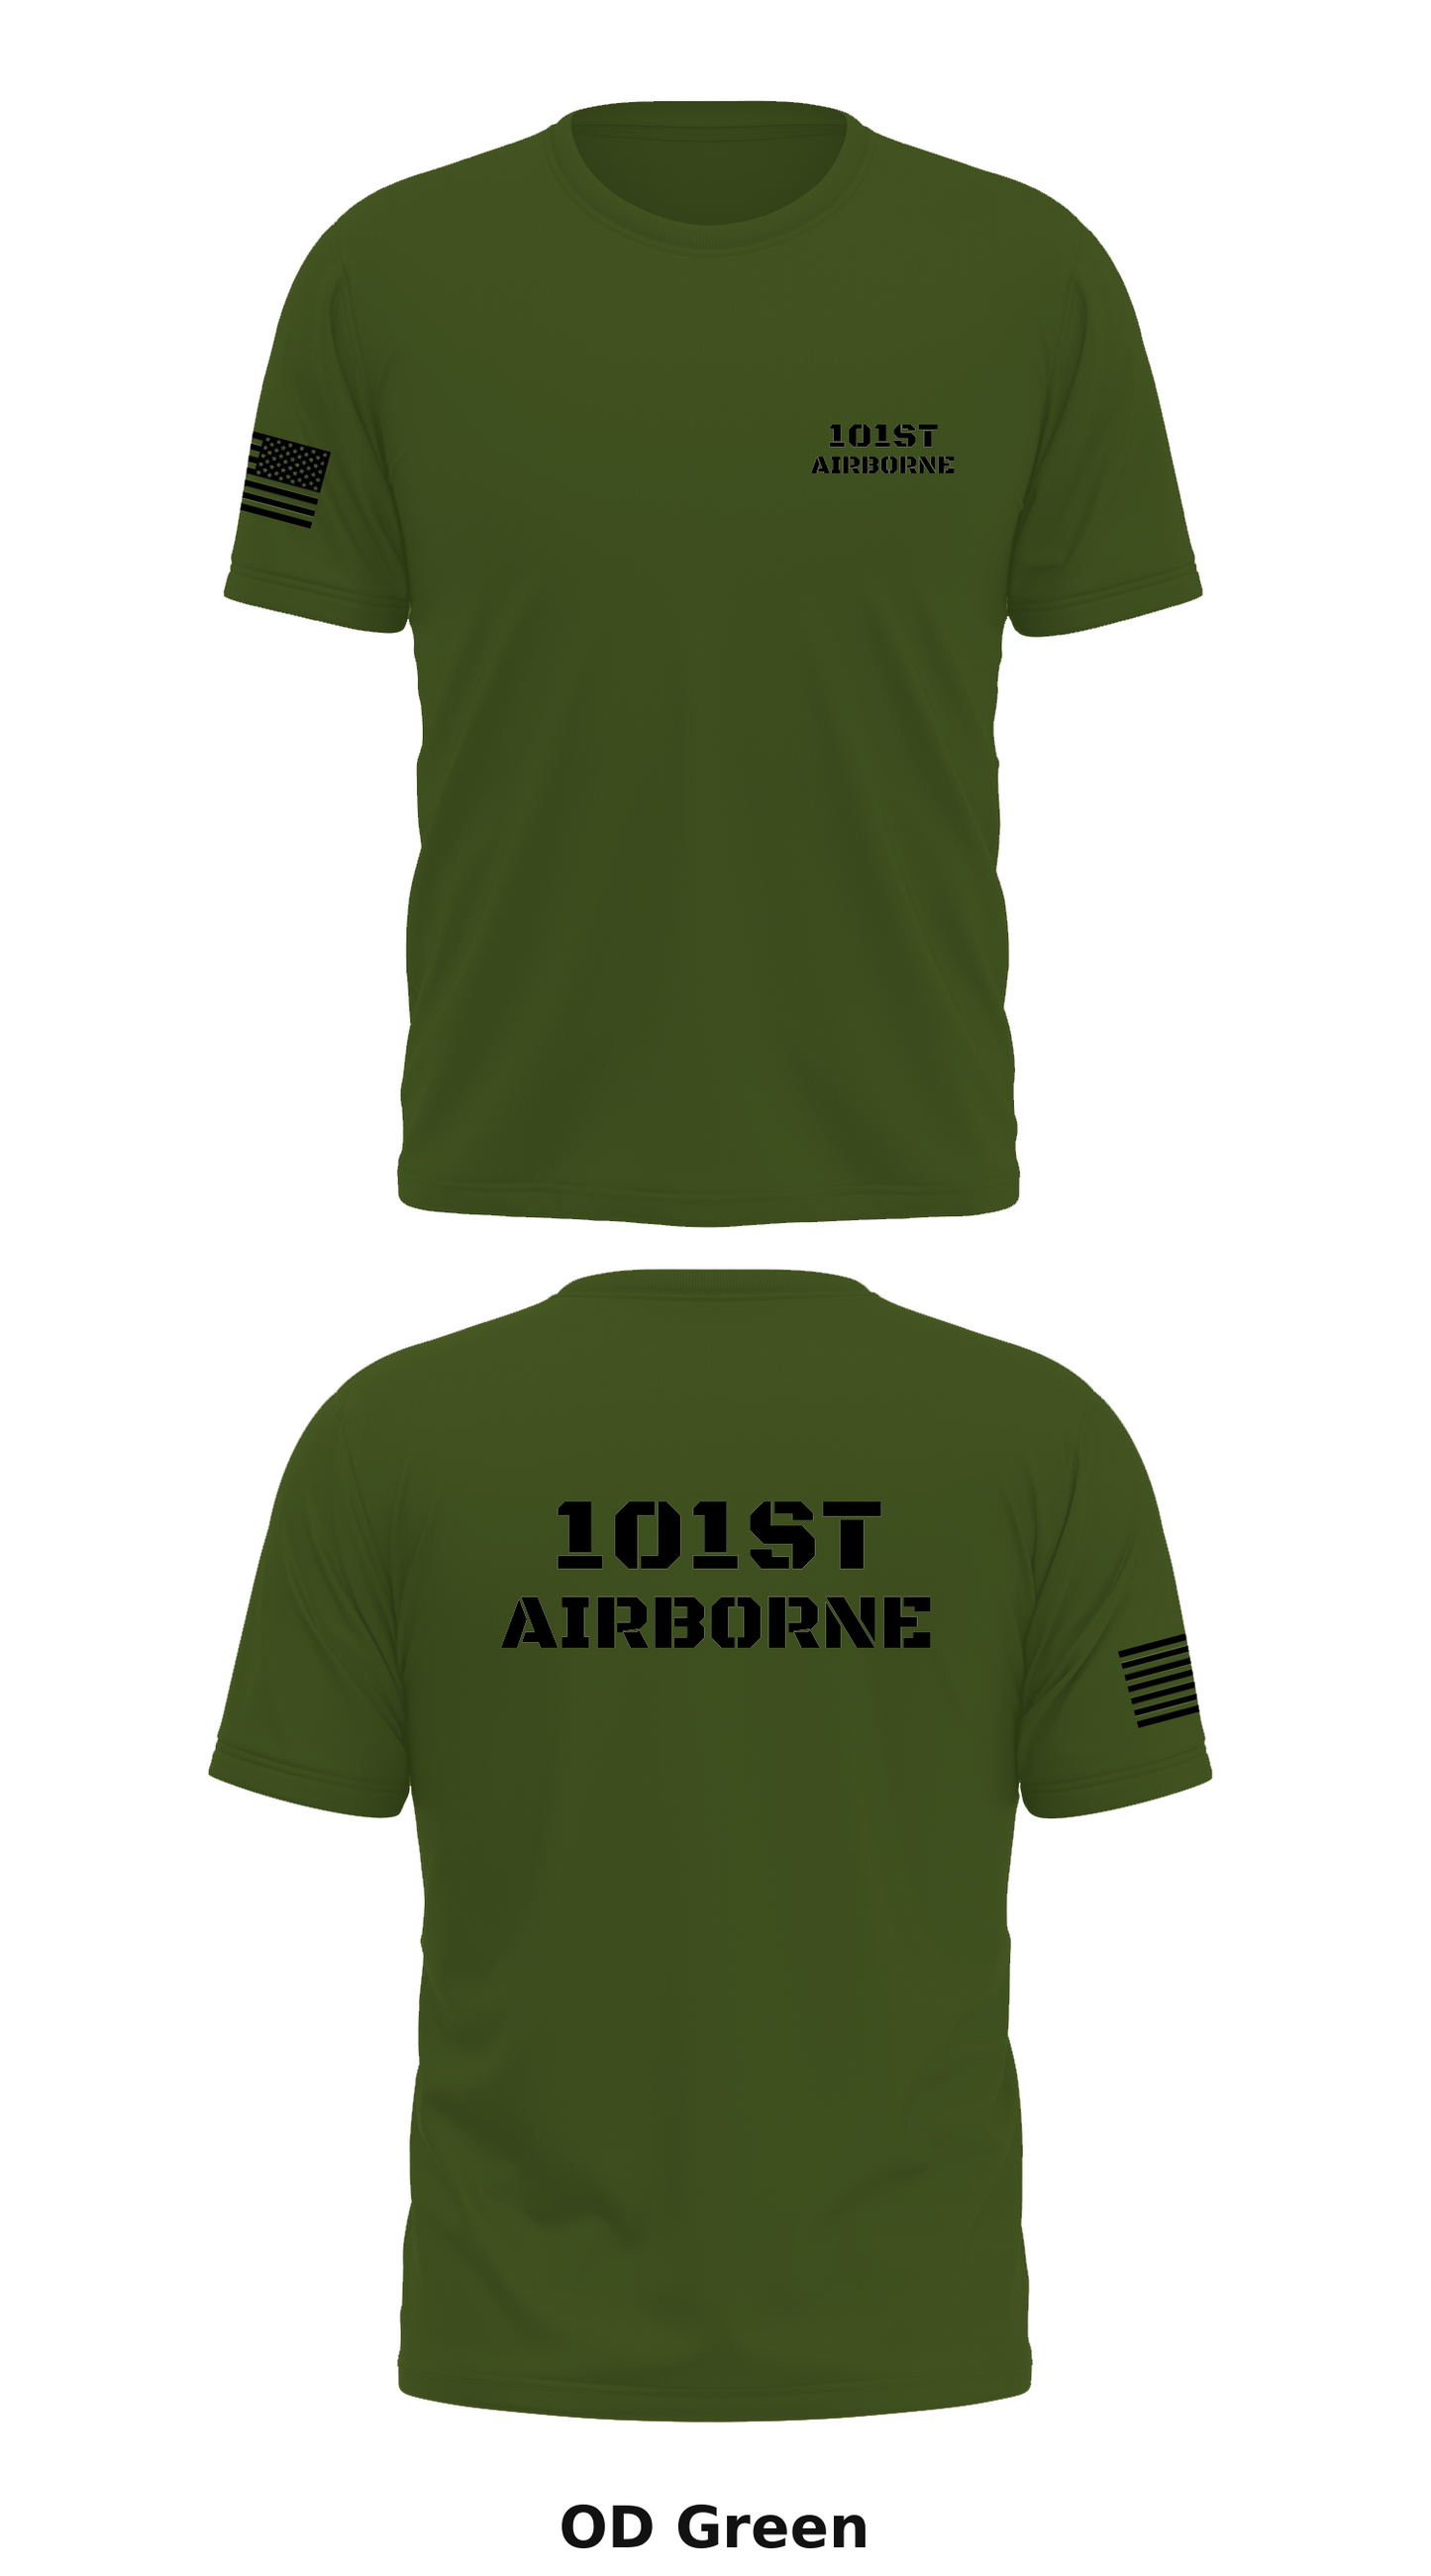 101st Airborne Store 1 Core Men's SS Performance Tee - ZOY